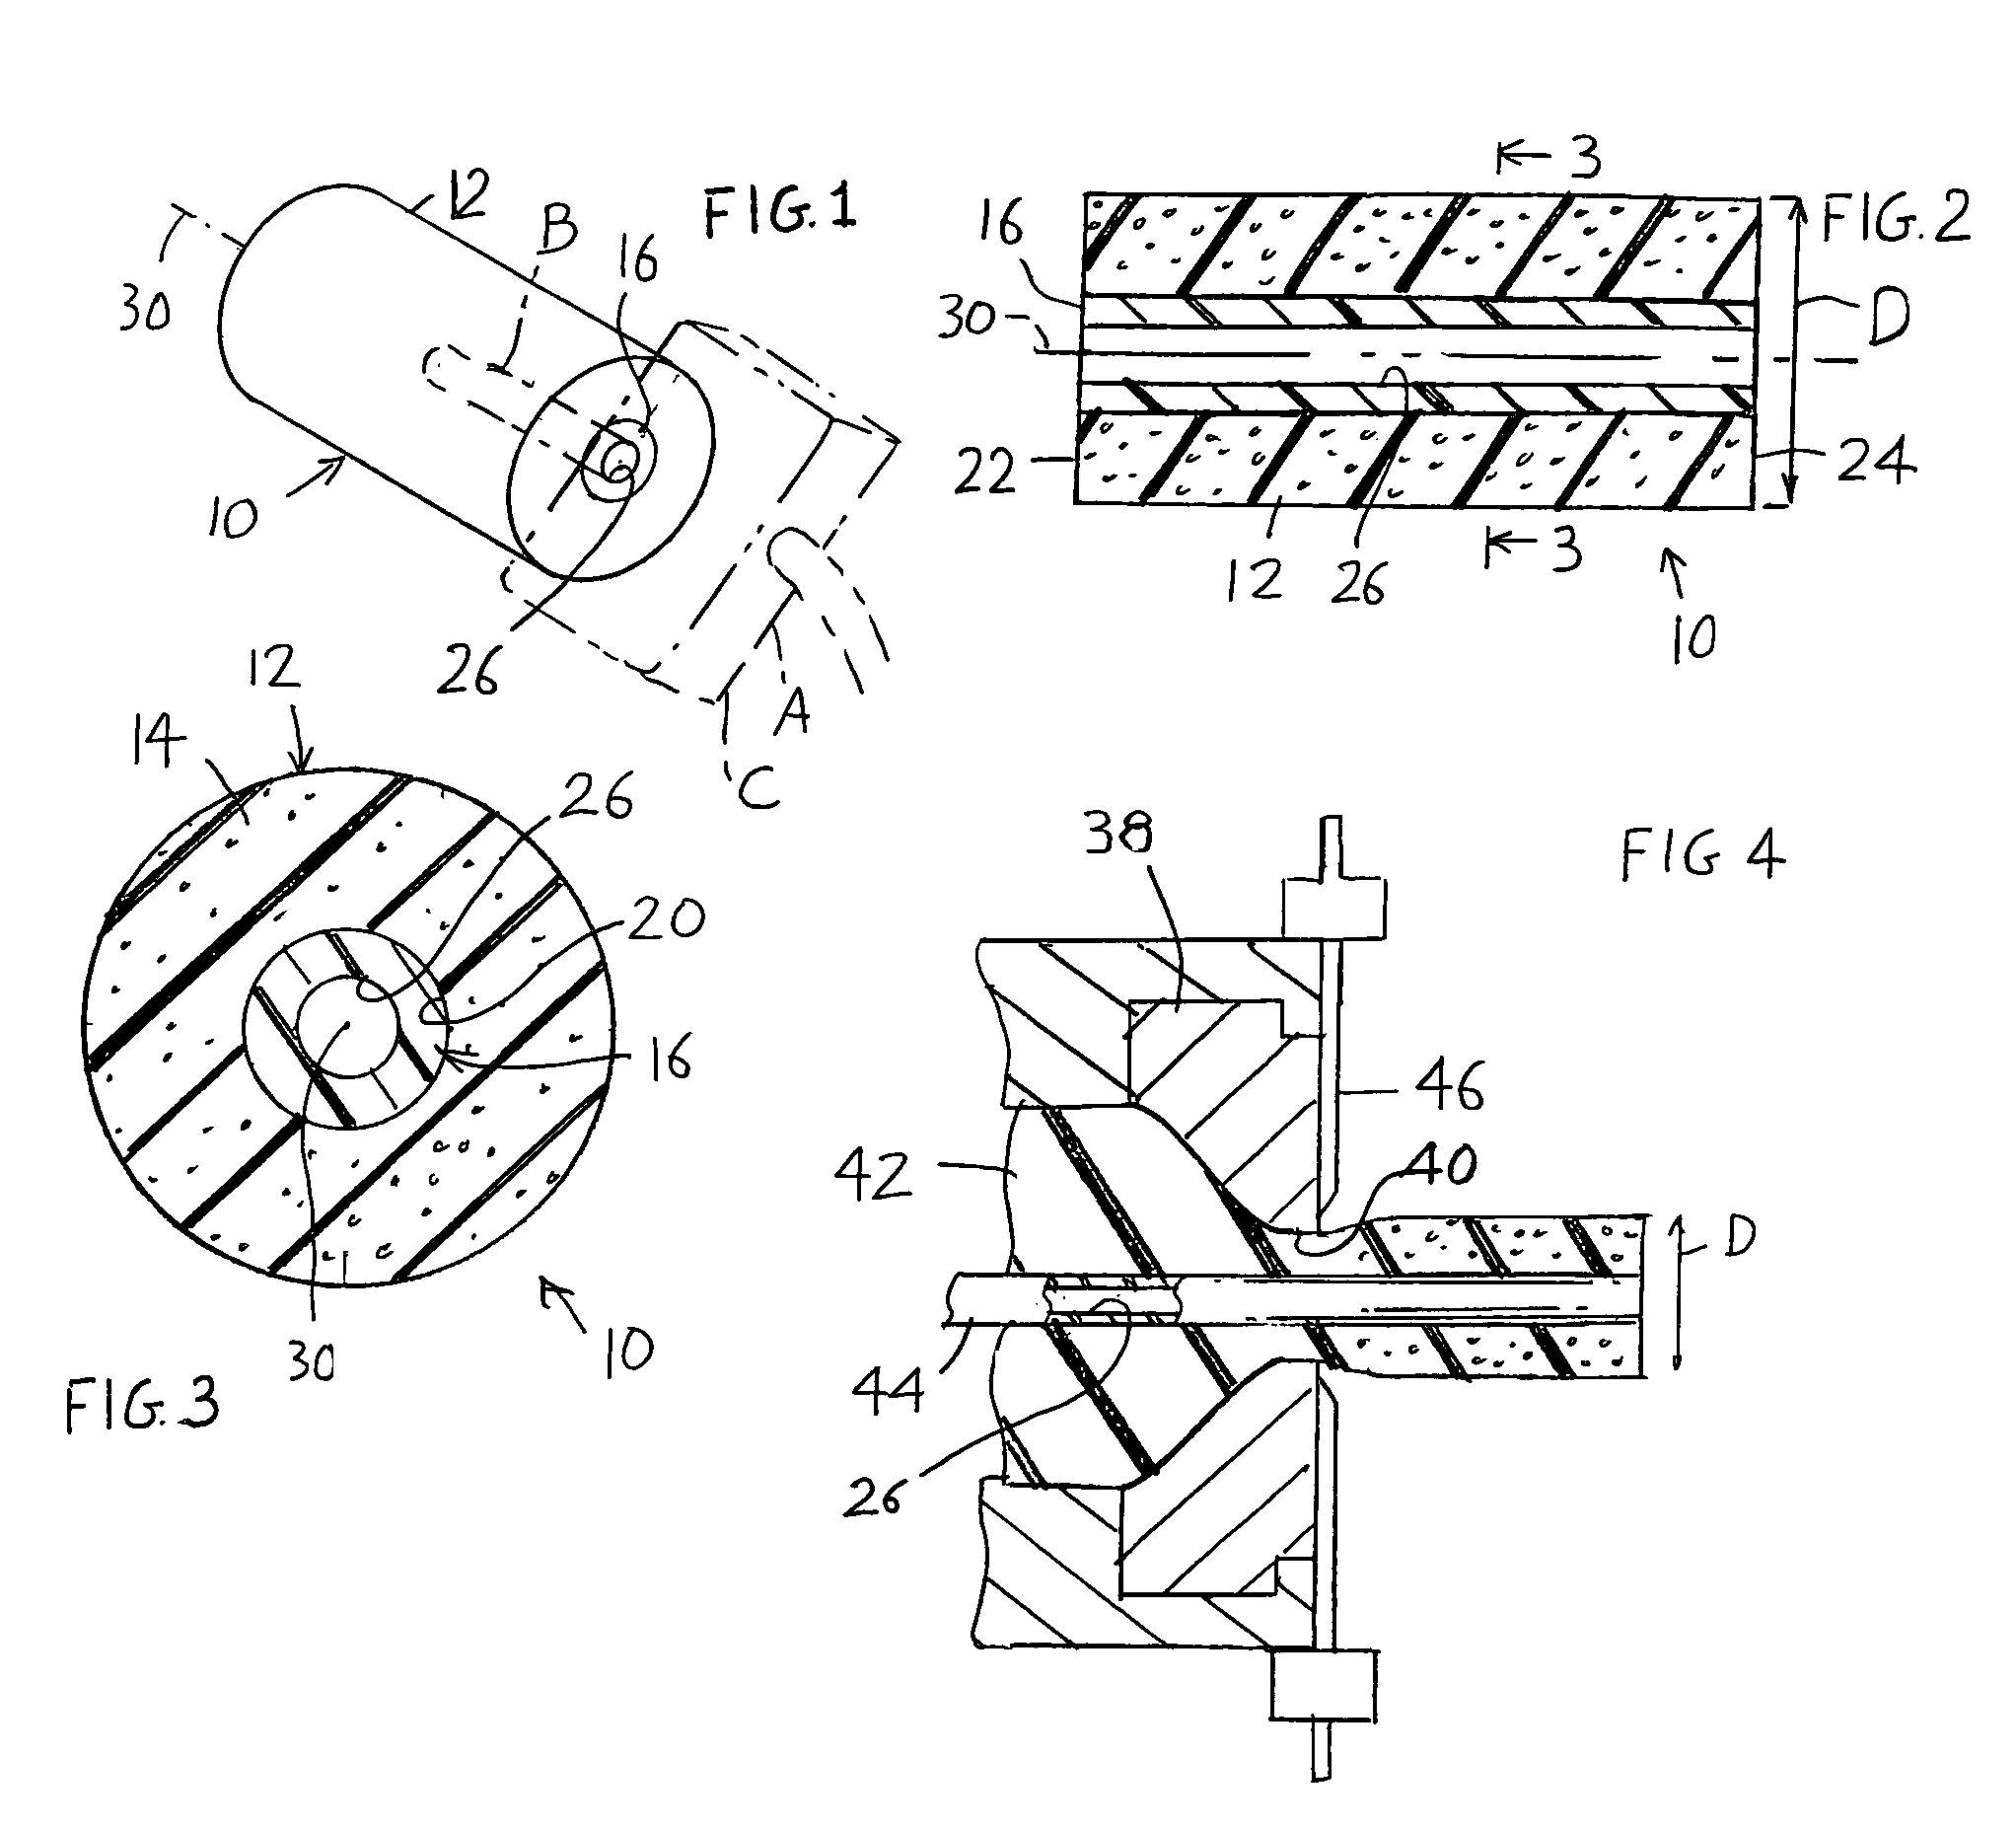 Method of forming an in-ear device